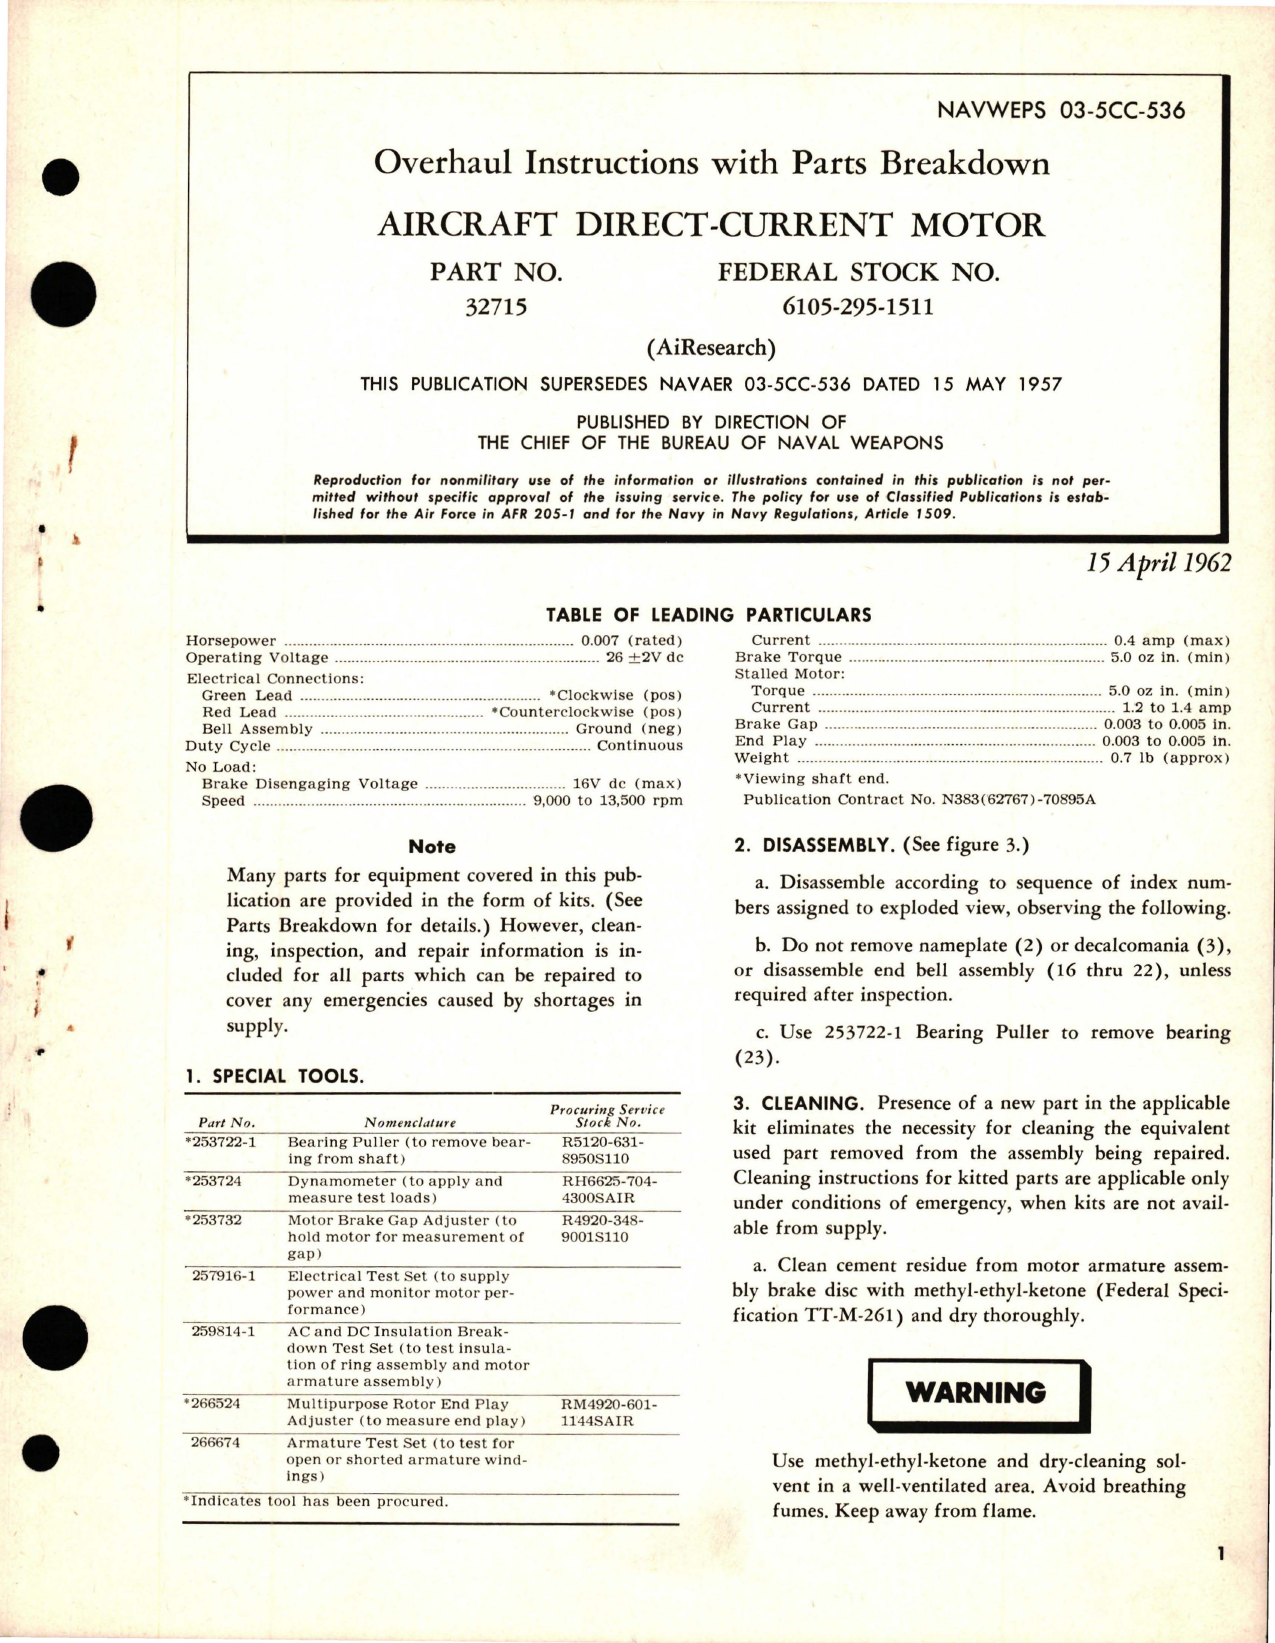 Sample page 1 from AirCorps Library document: Overhaul Instructions with Parts Breakdown for Direct-Current Motor - Part 32715 